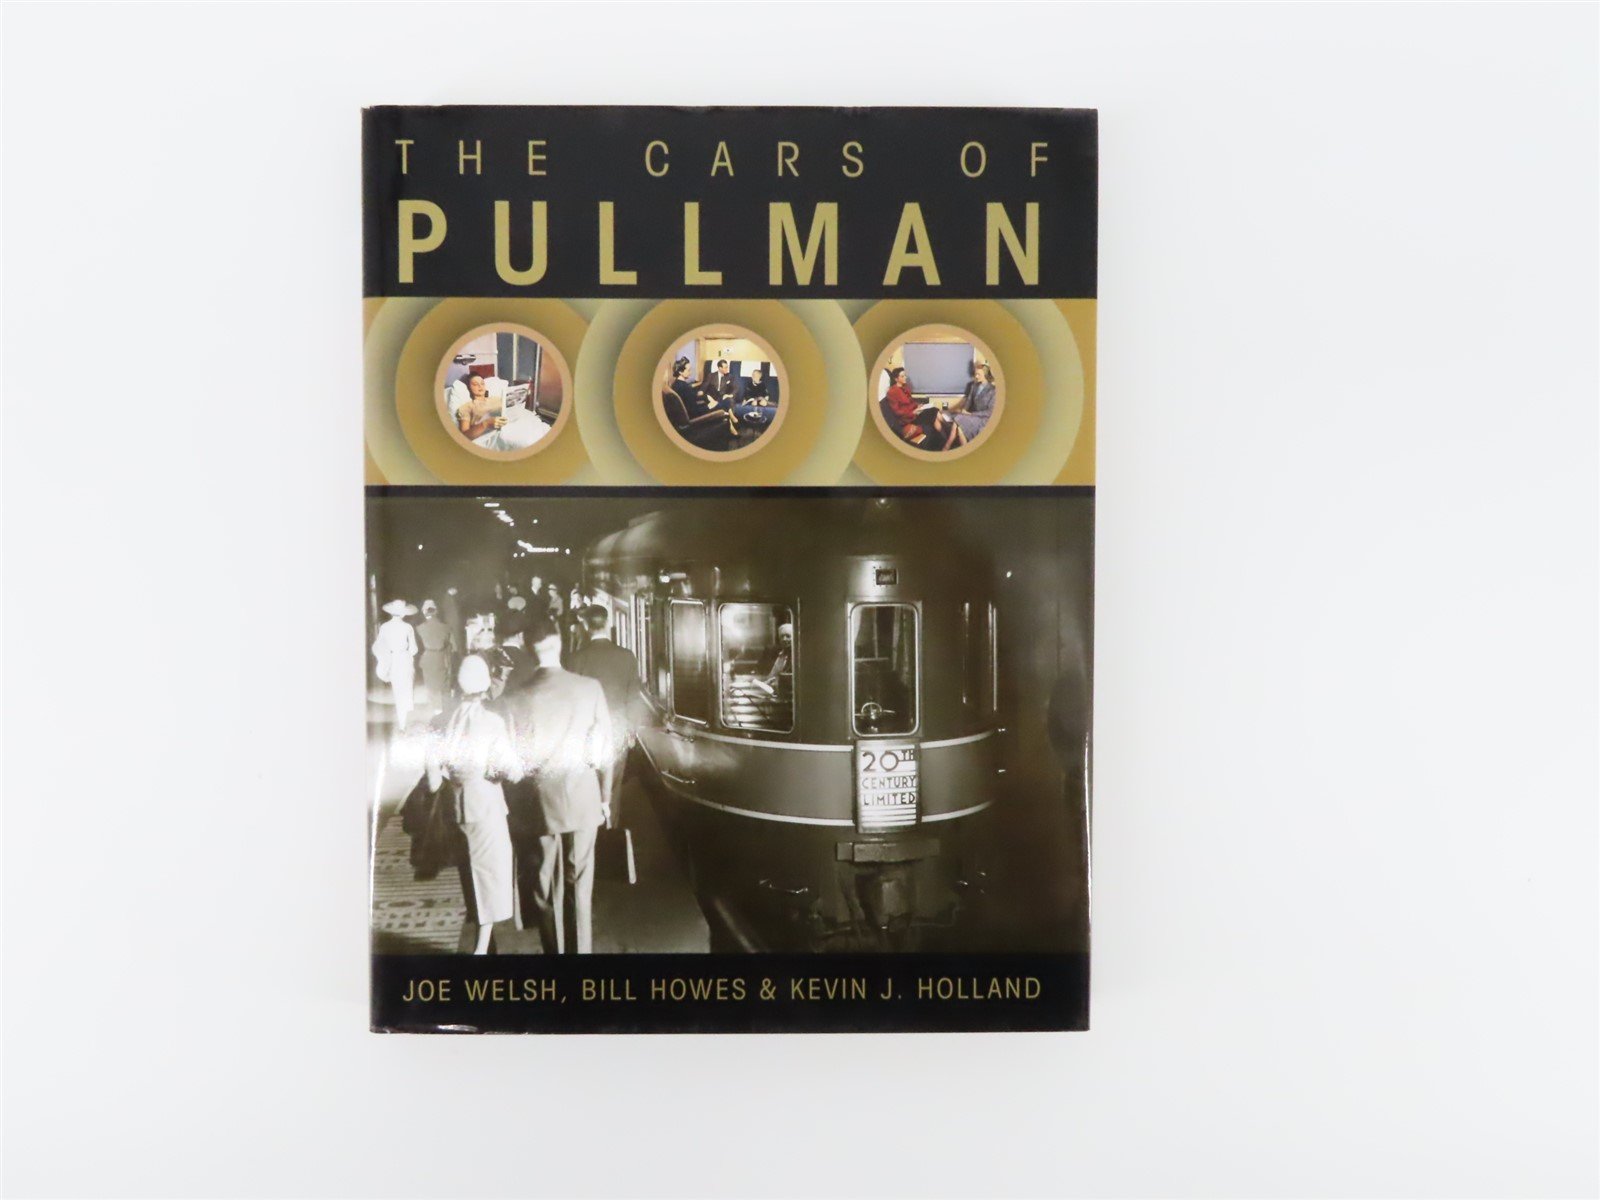 The Cars Of Pullman by Welsh, Howes & Holland ©2010 HC Book